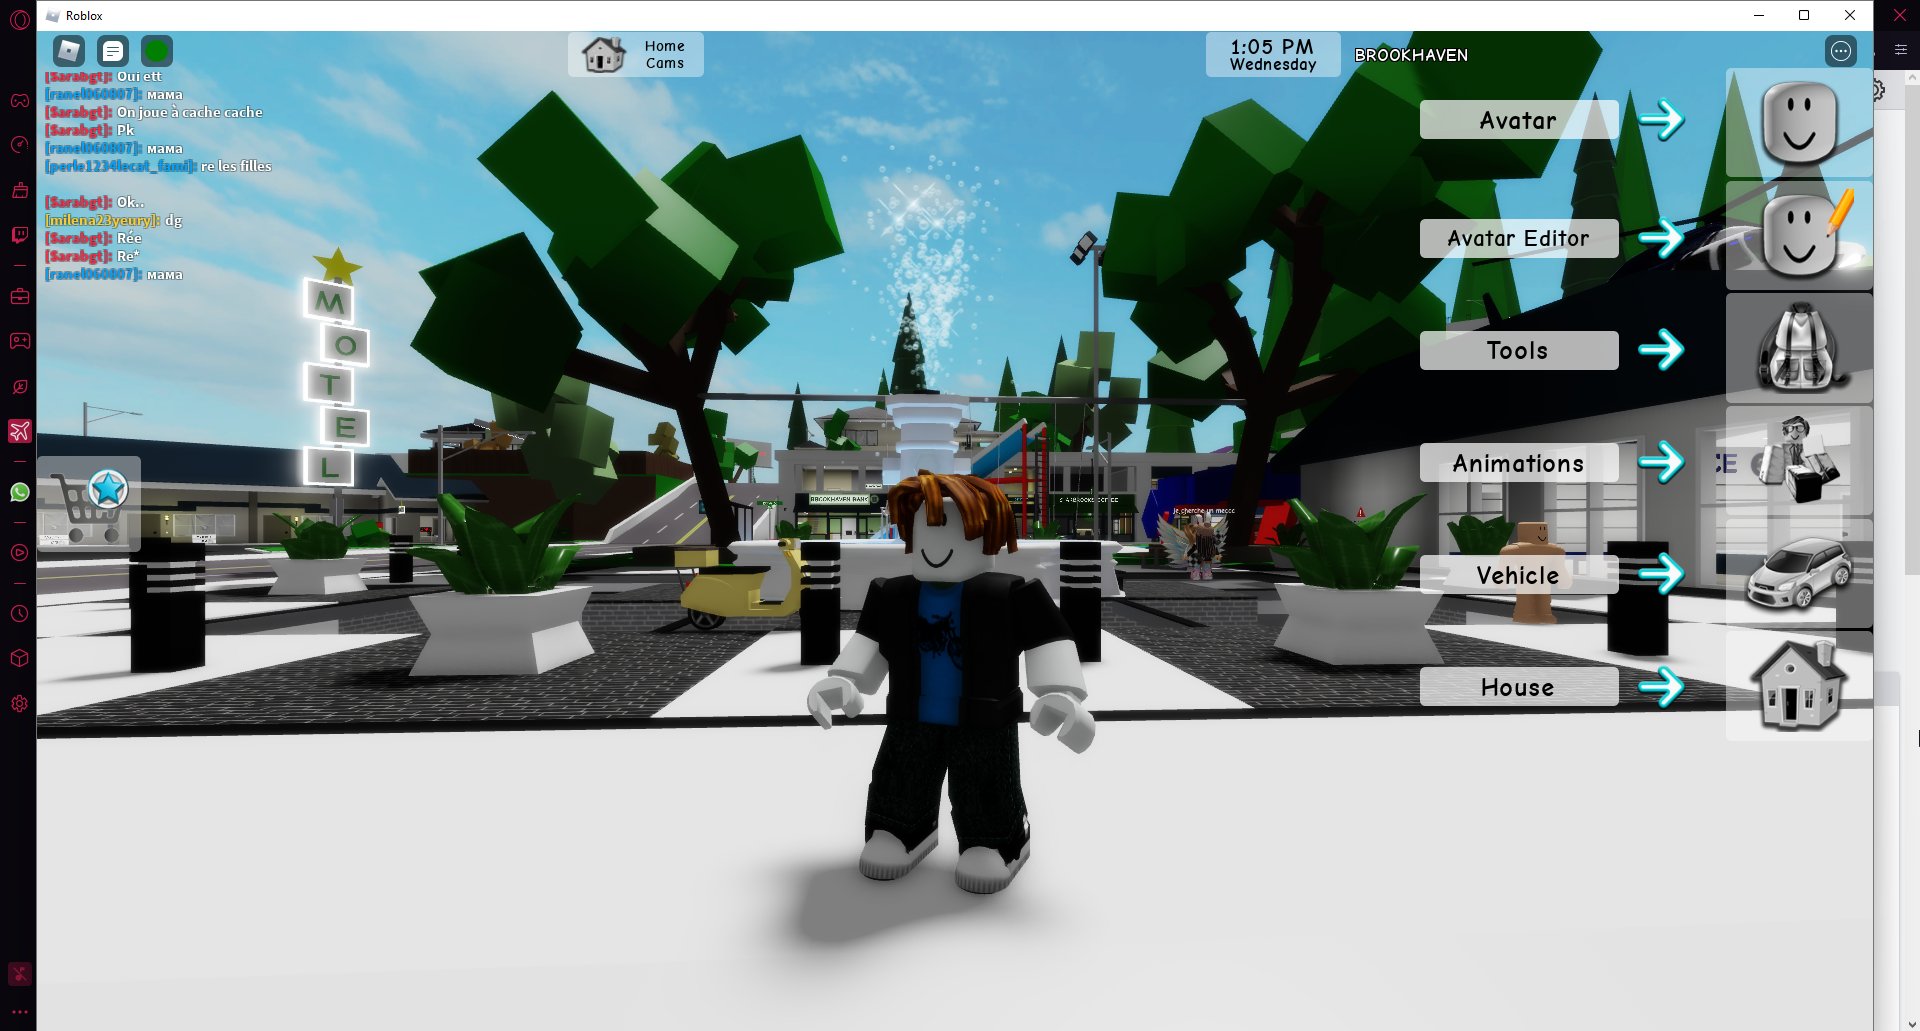 RTC on X: OperaGX, an internet browser designed specifically for gamers,  is now the first browser to have teamed up with a Roblox game!  @OperaGXOfficial has brought exclusive in-game content to Arsenal